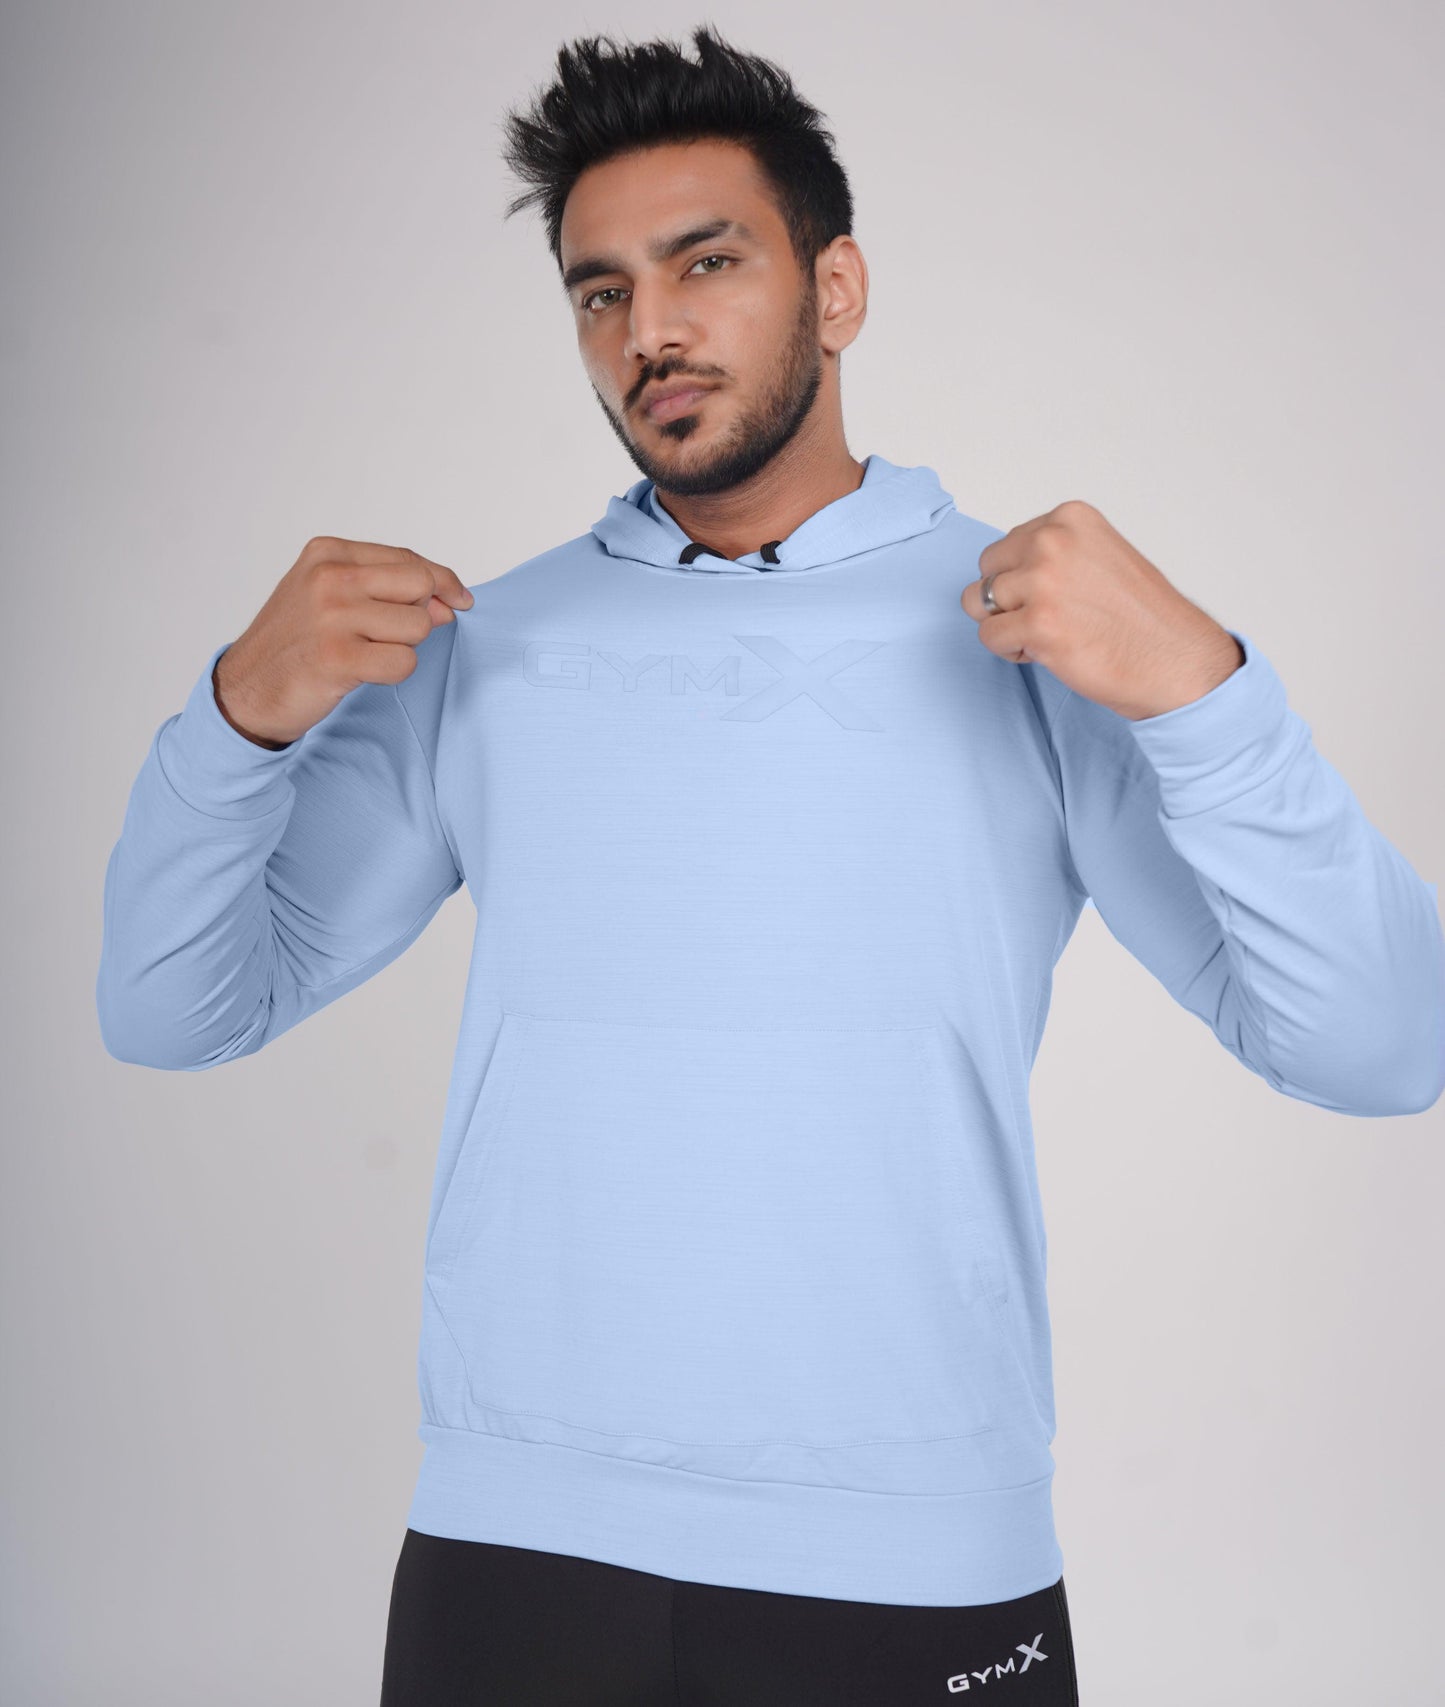 Heavenly Blue GymX Bold Pullover